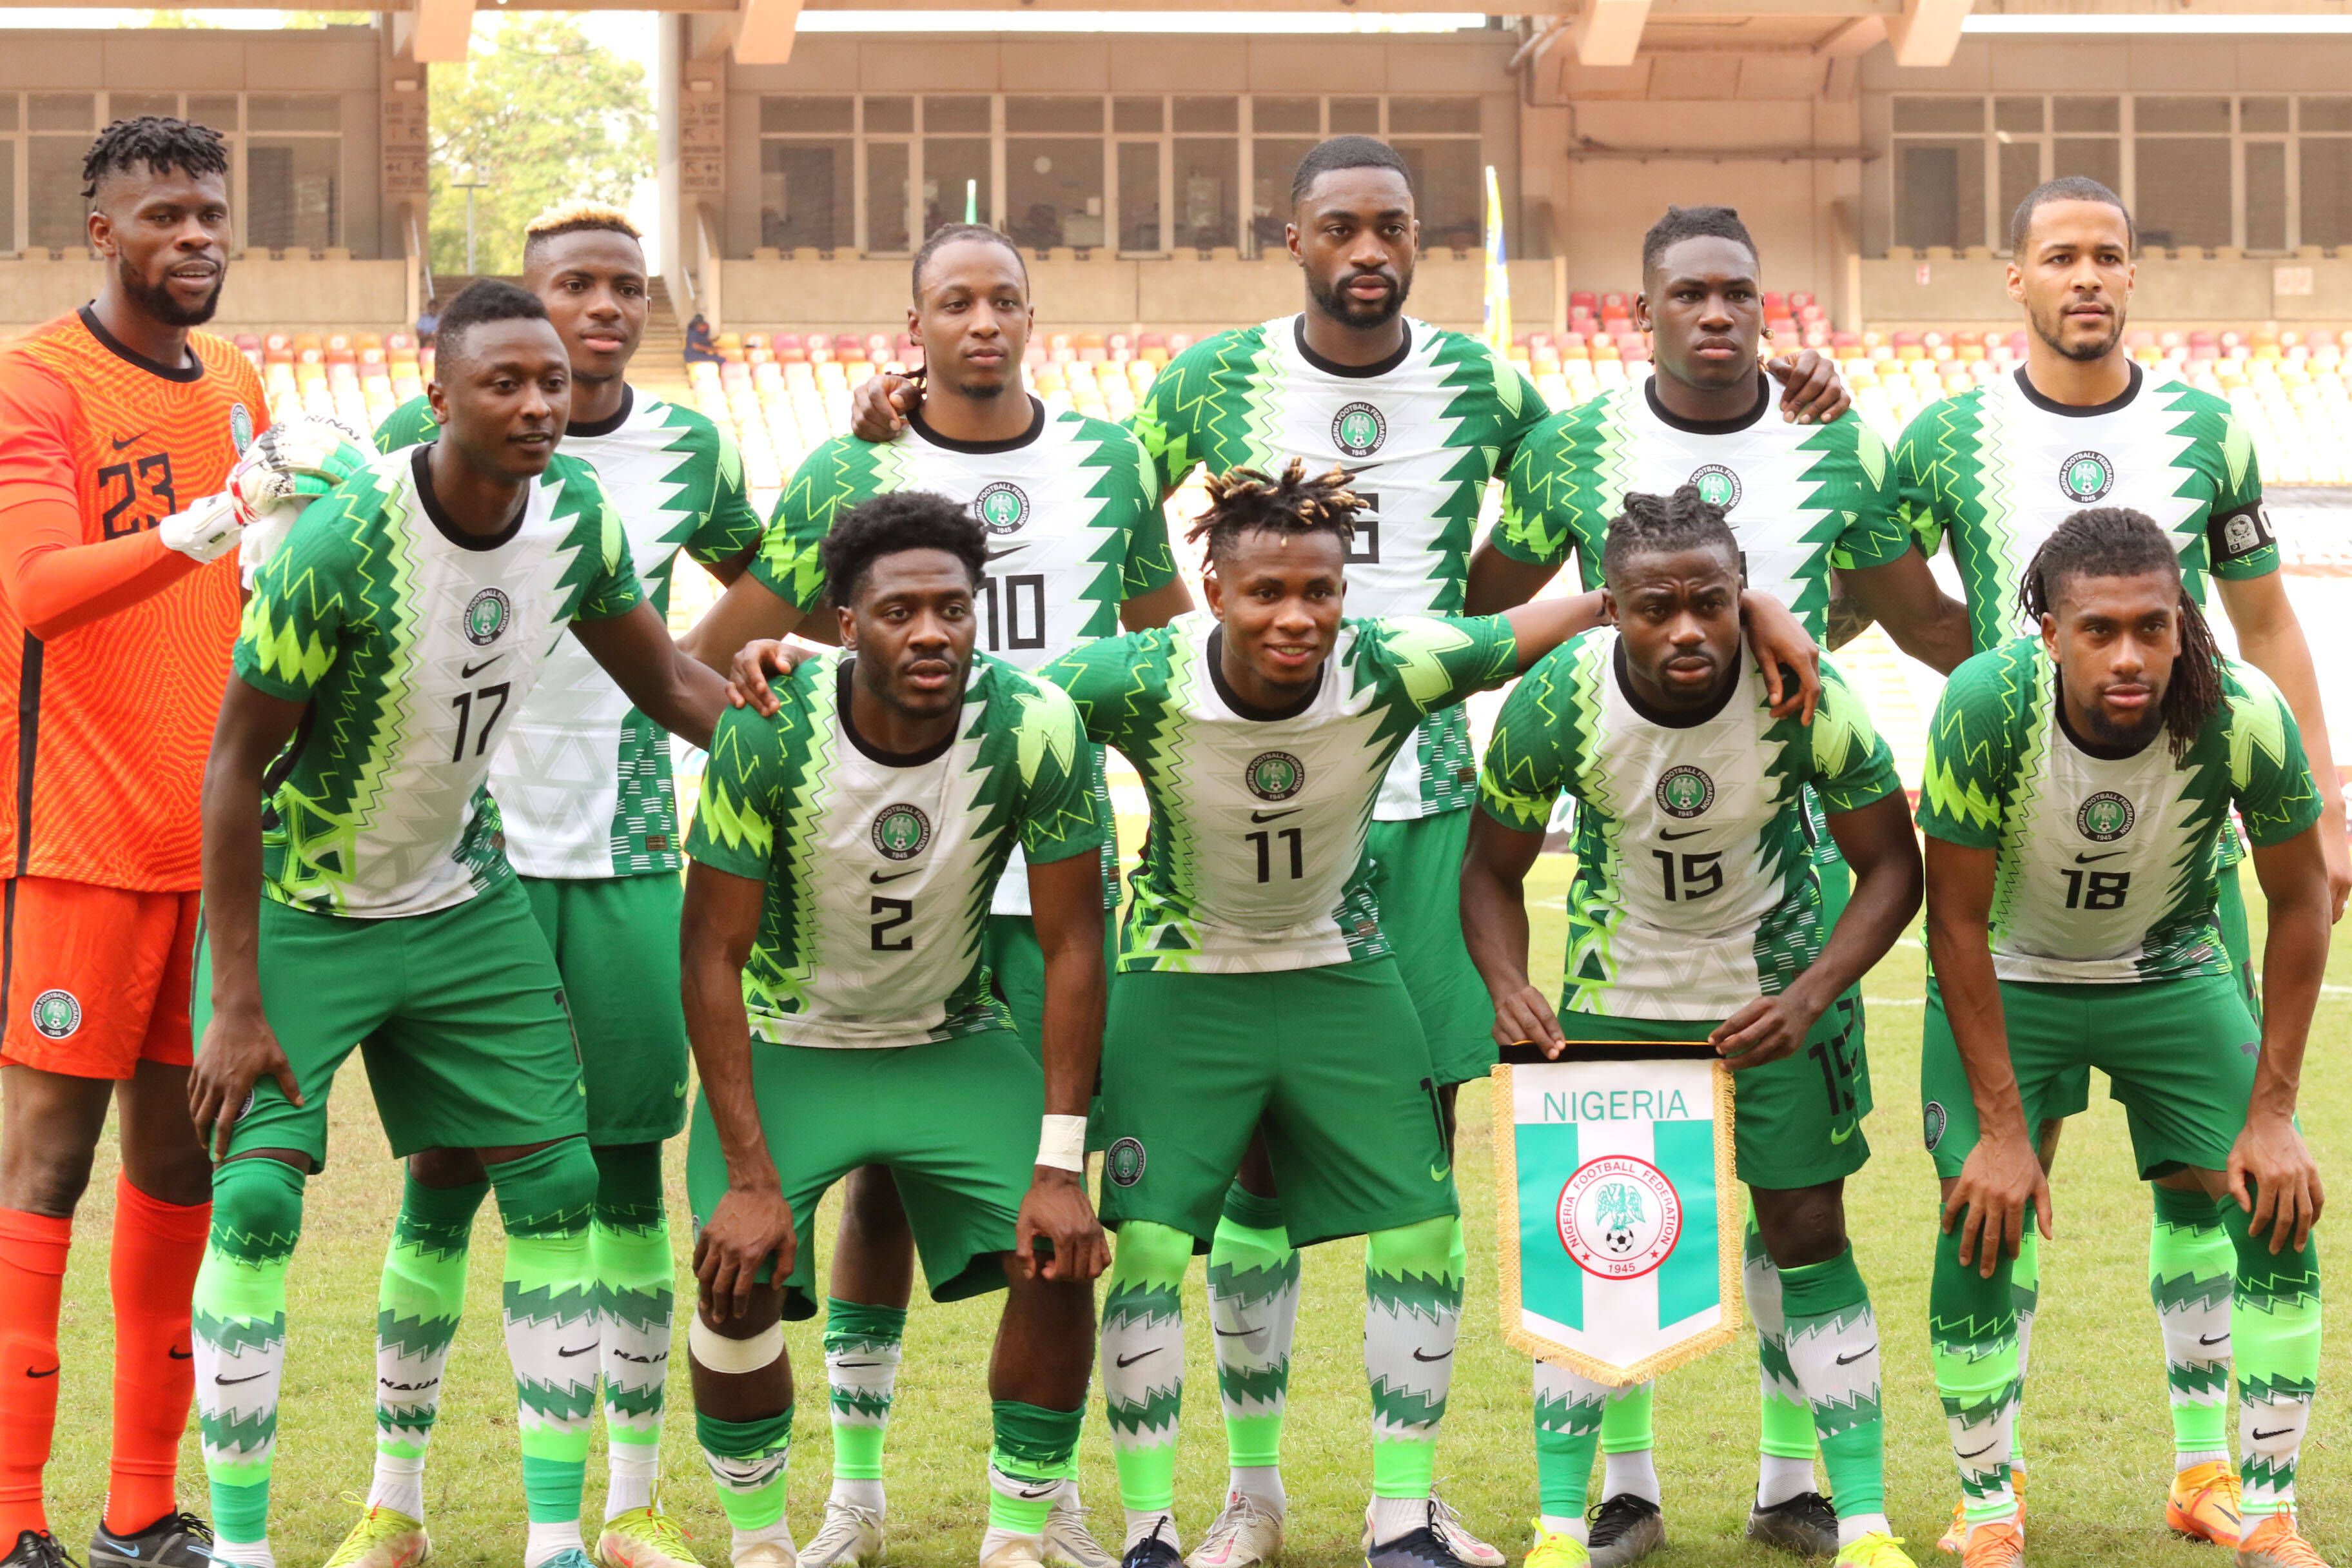 Nigeria face Guinea-Bissau in an AFCON doubleheader